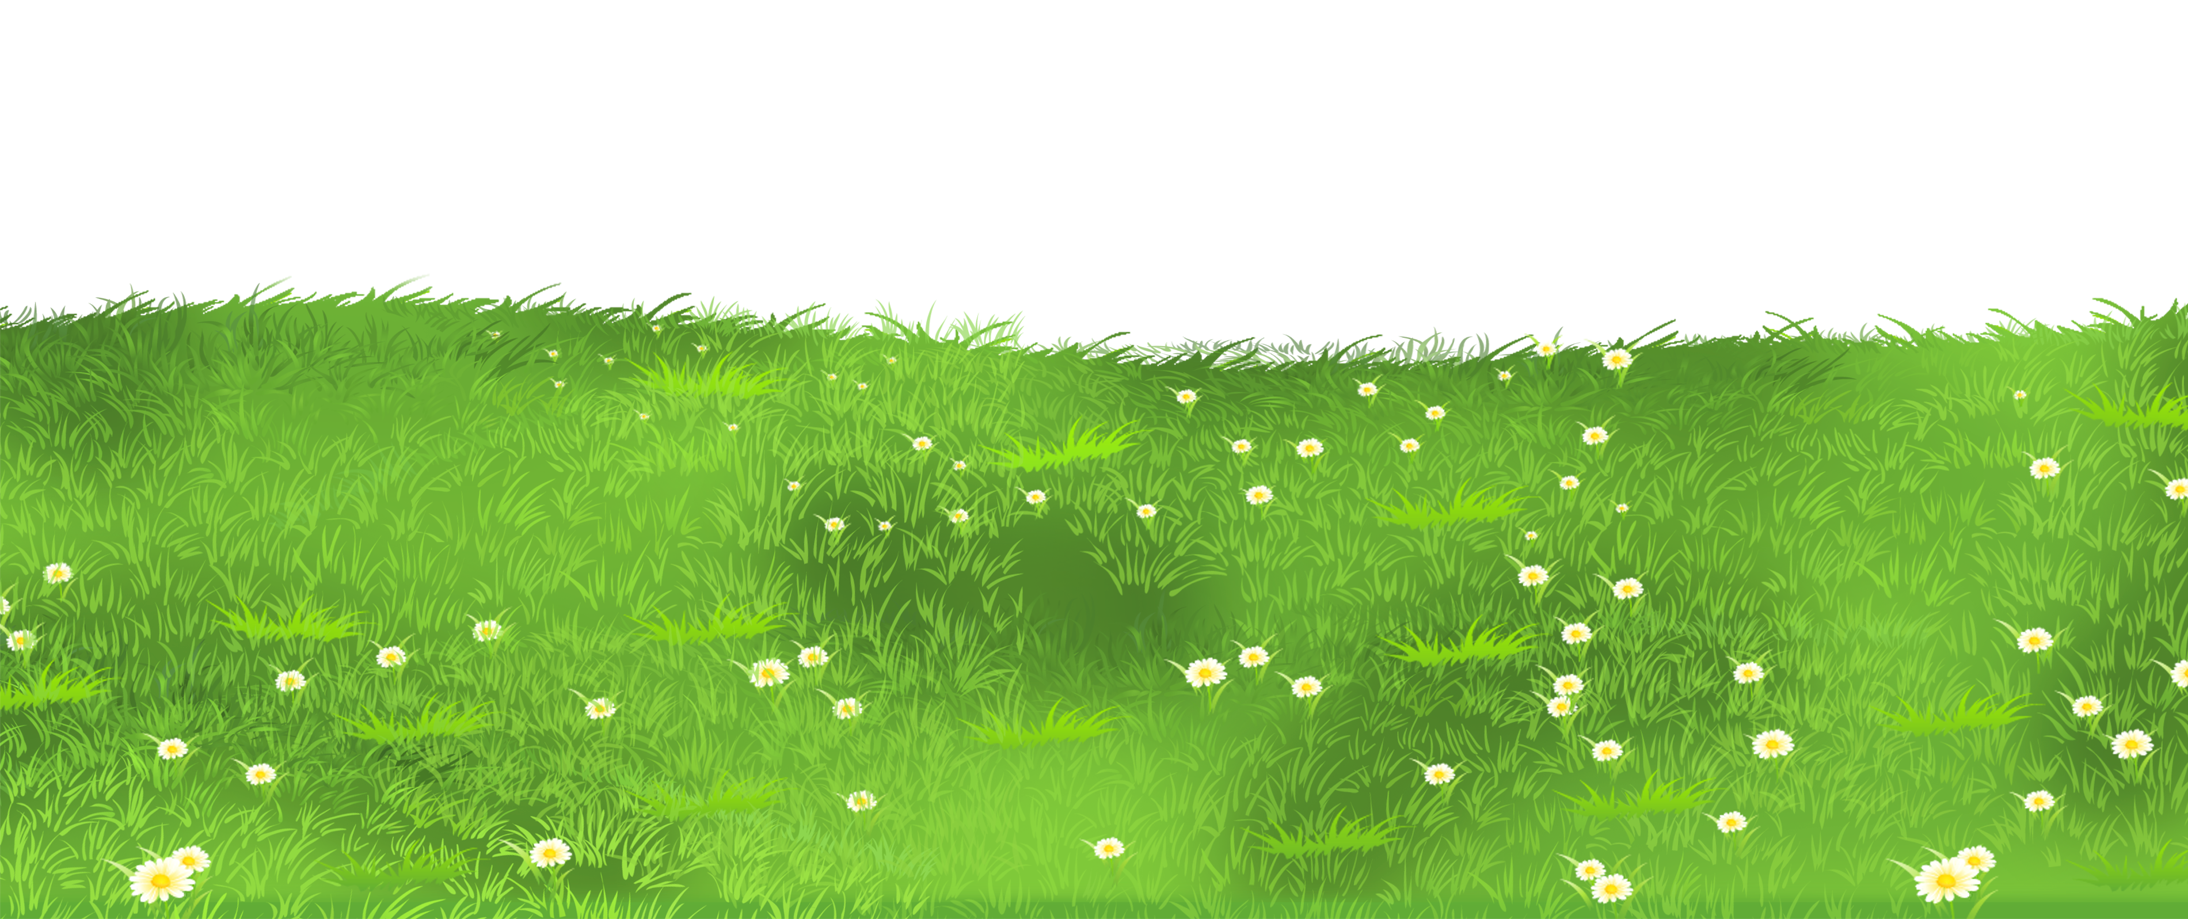 png clipart grass - photo #28